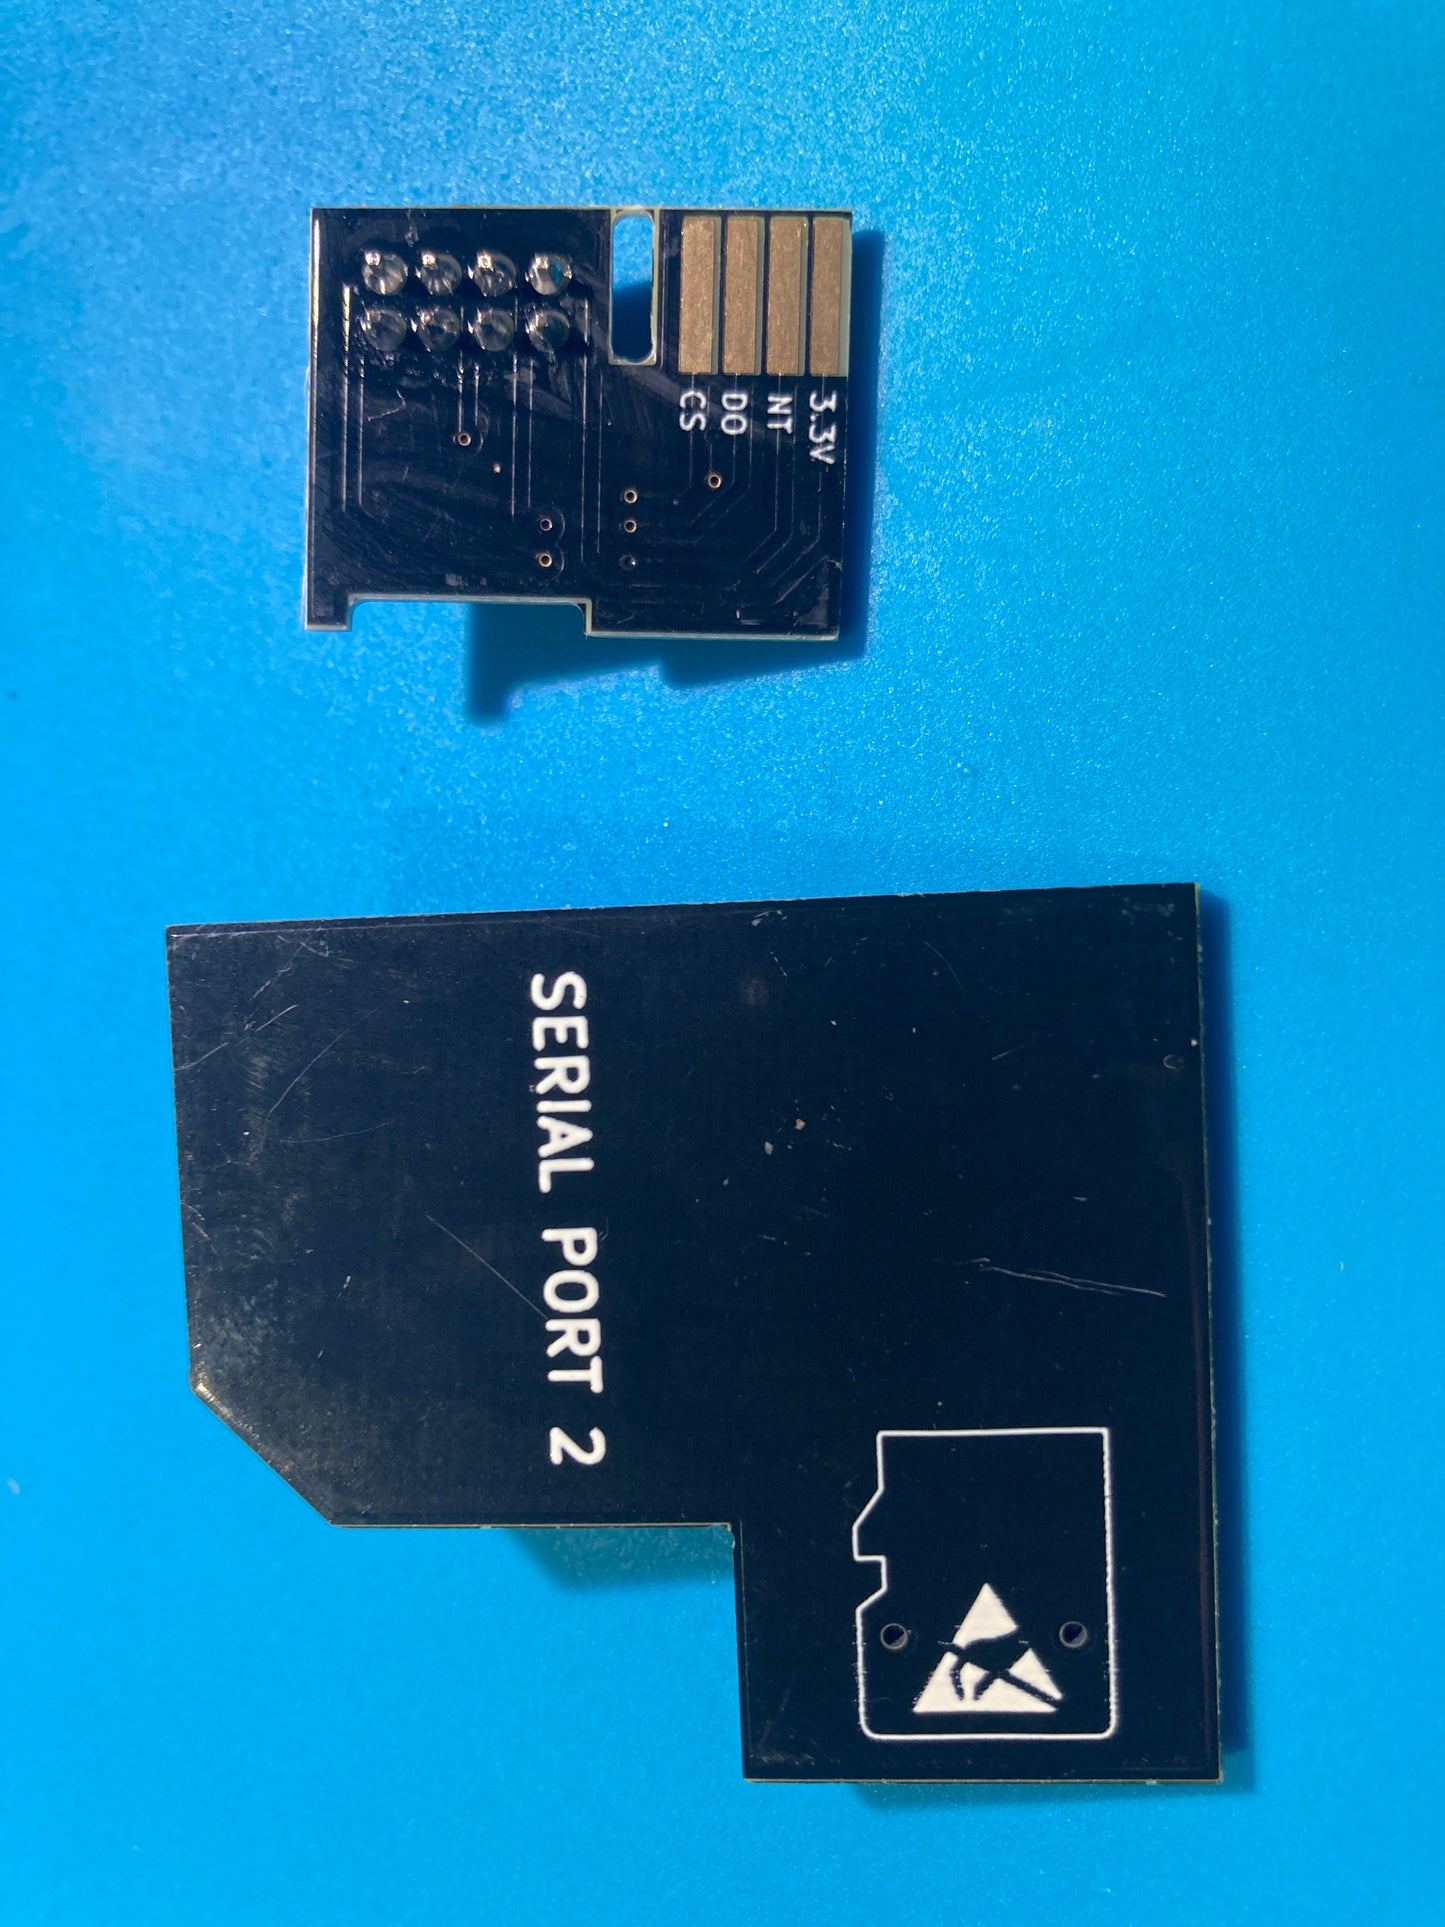 Gamecube - SD2SP2 Adapter for use with GB player